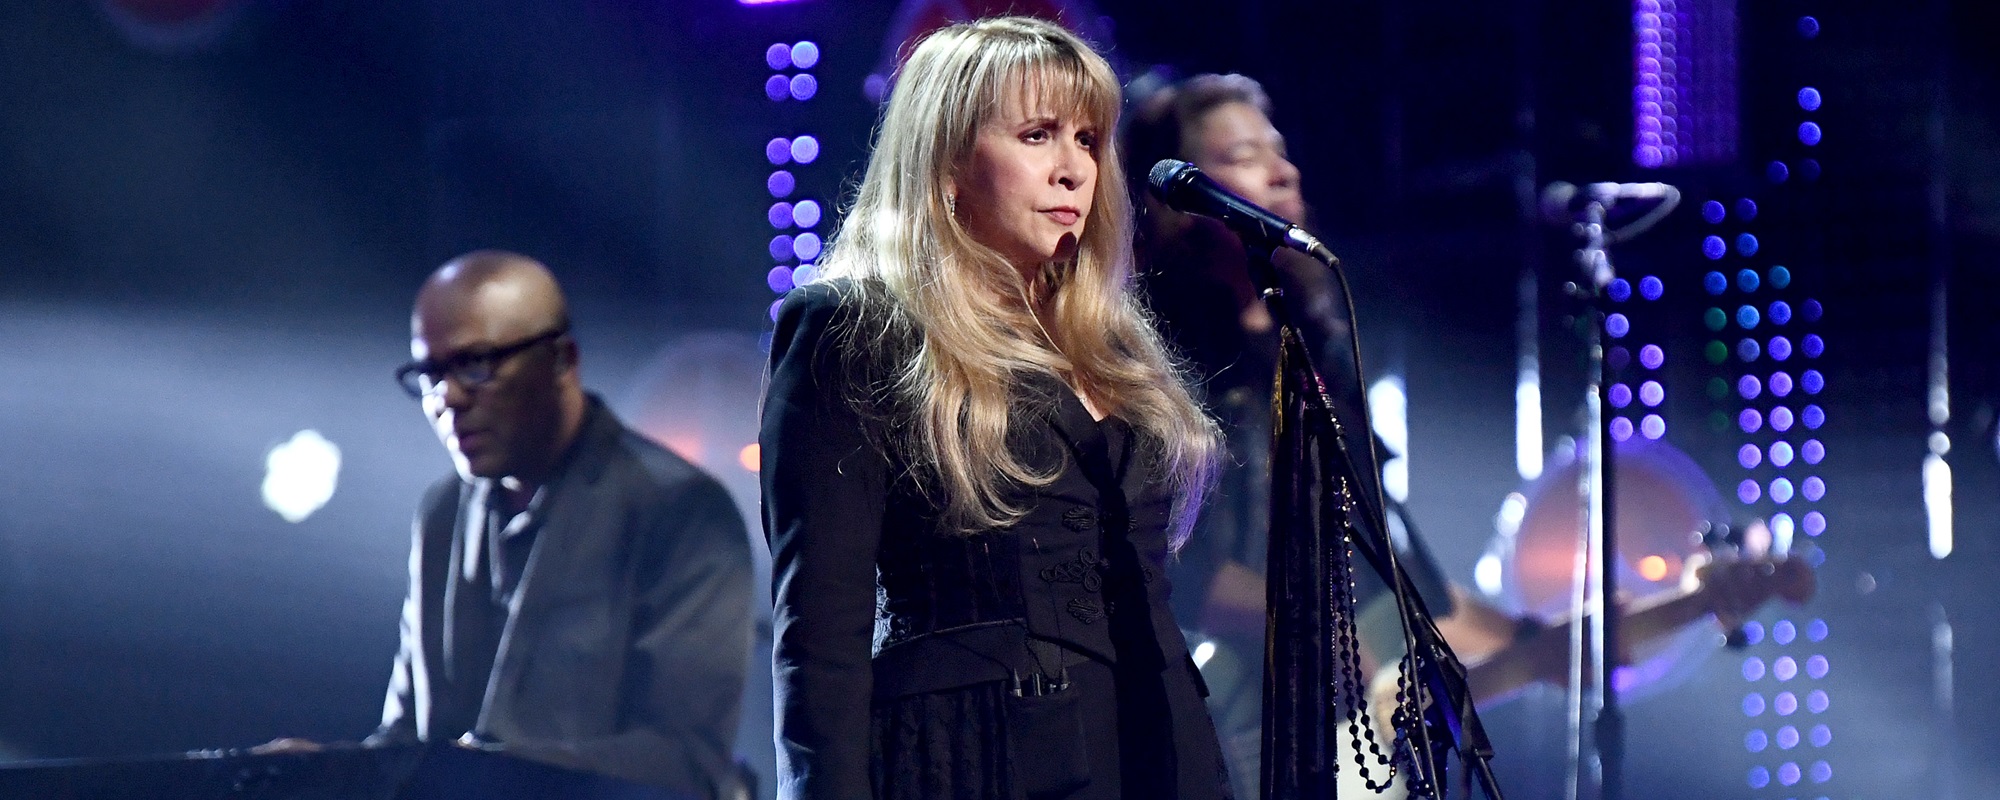 3 of the Best Stevie Nicks Duets–That Aren’t “Stop Draggin’ My Heart Around” or “Leather and Lace”